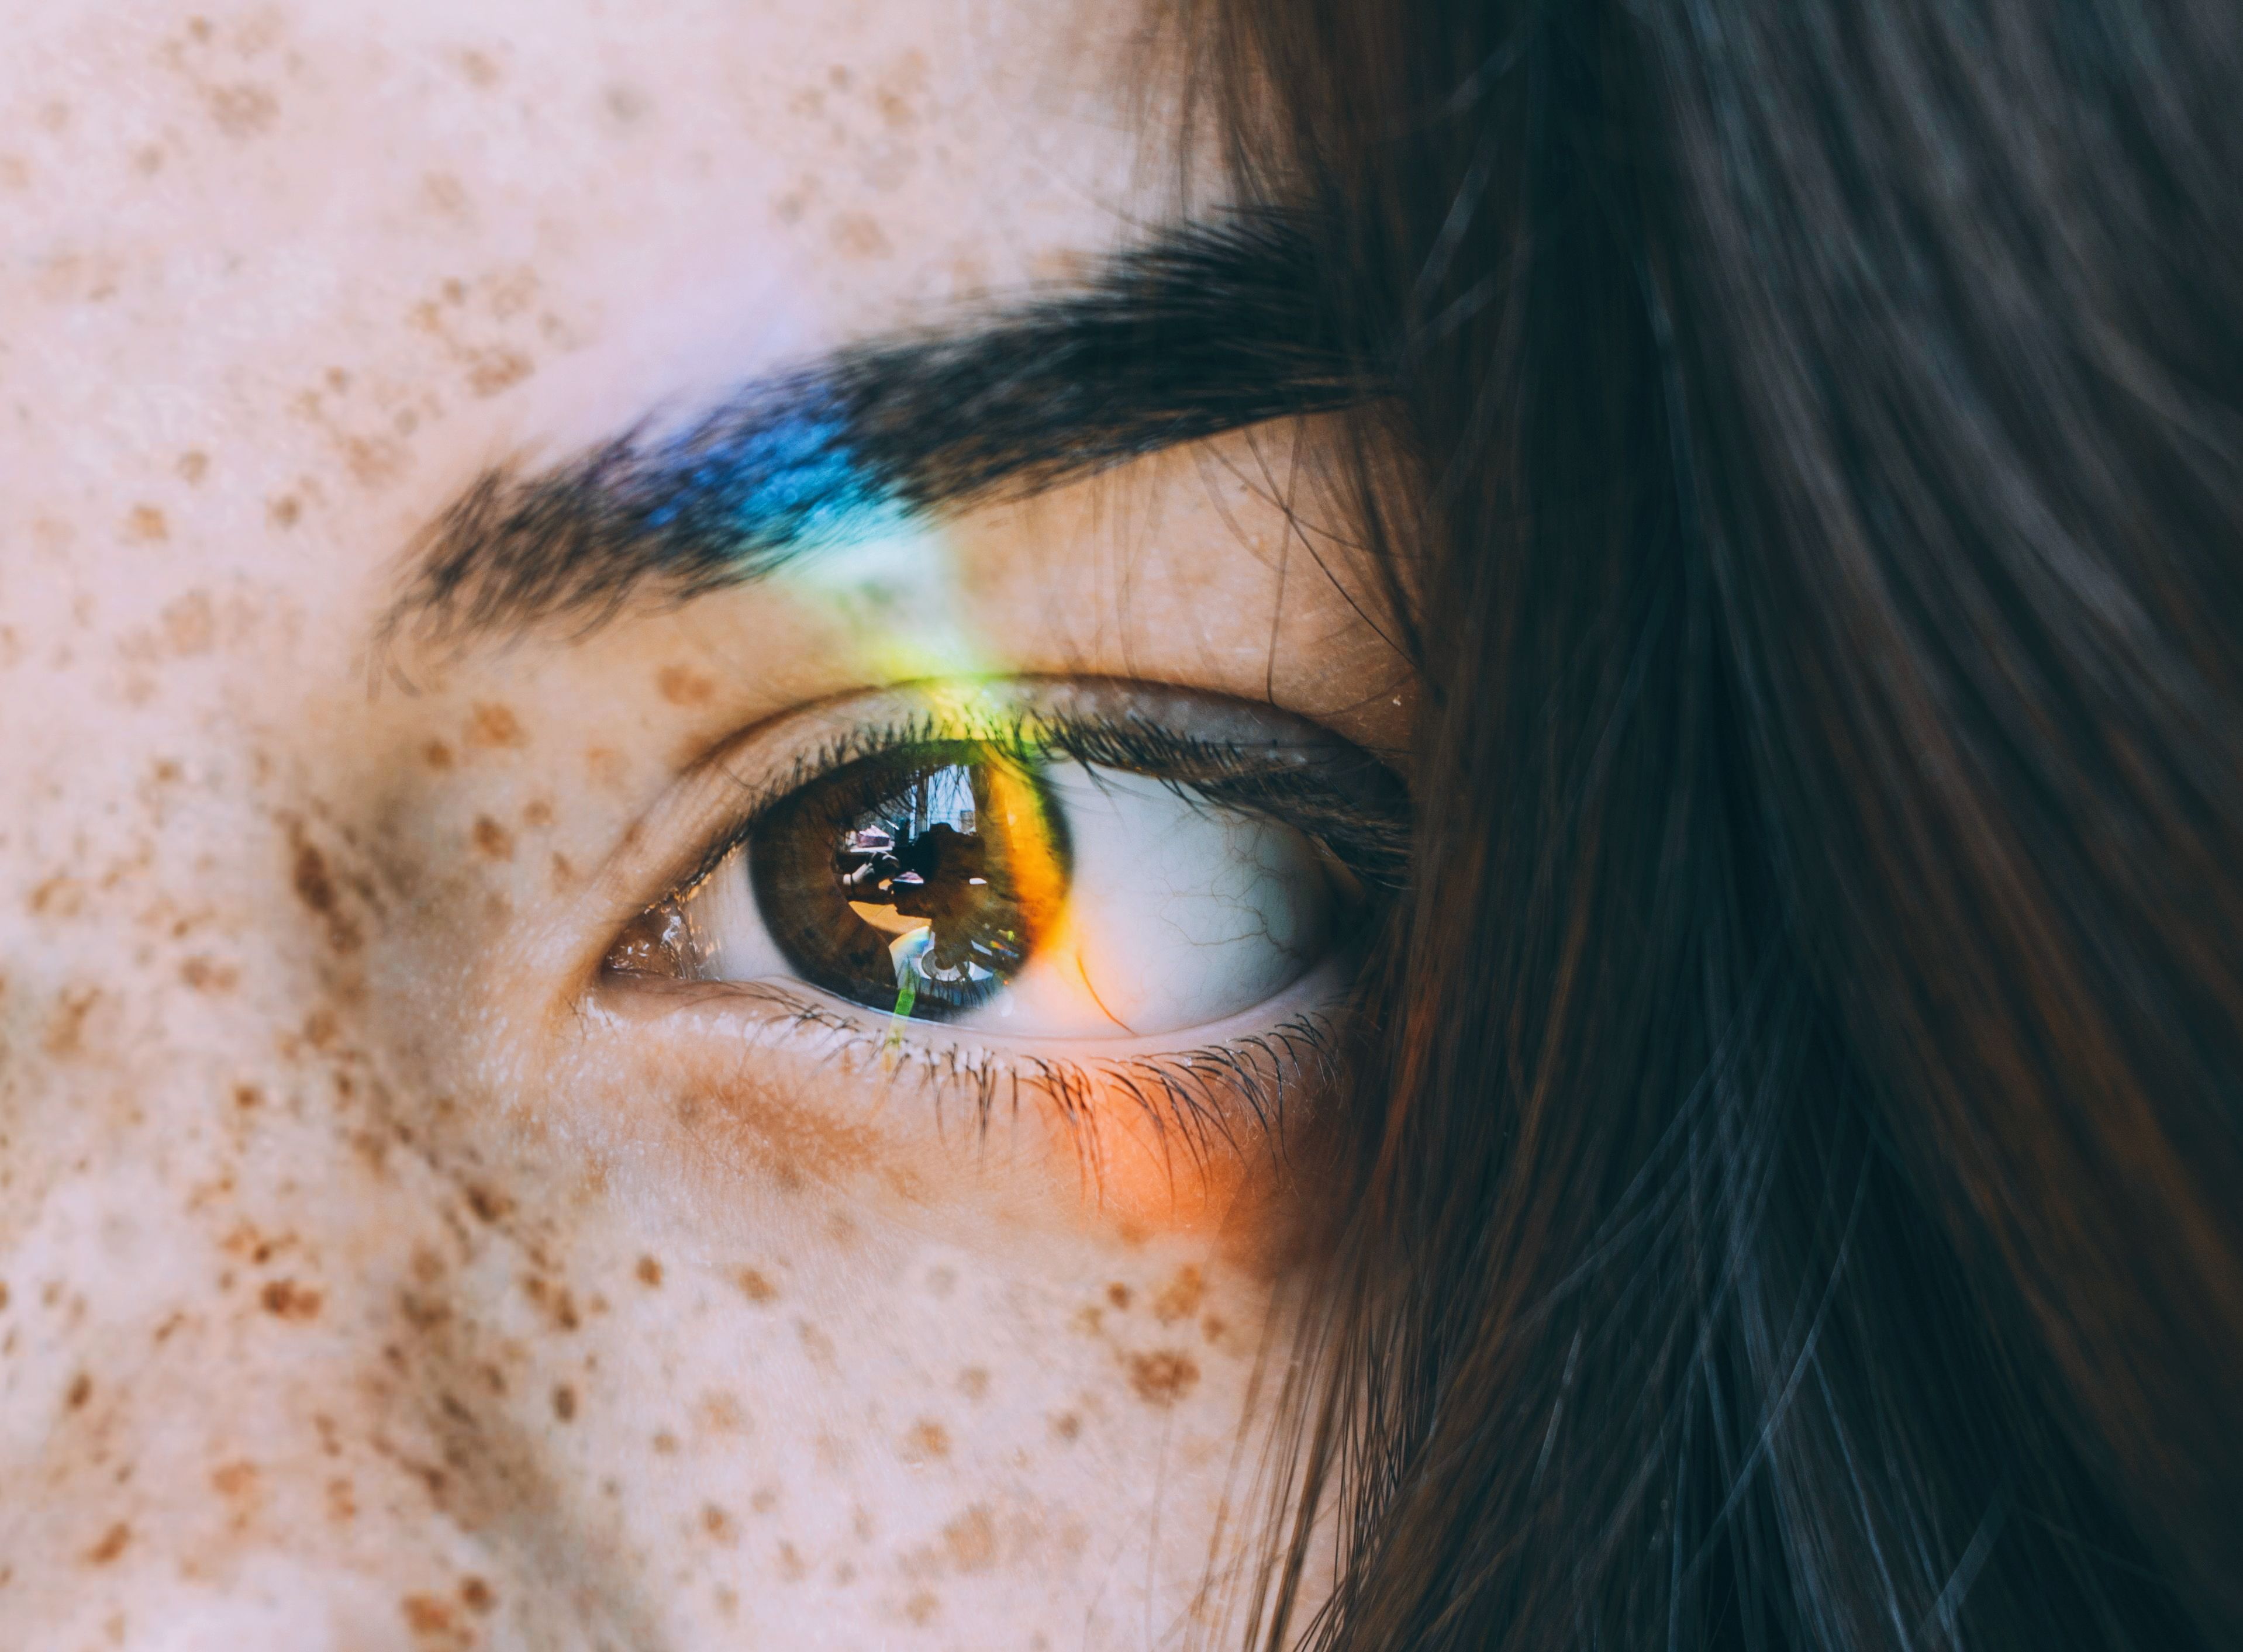 Download 10 Reasons Your Eyes Are Acting Weird According To Doctors